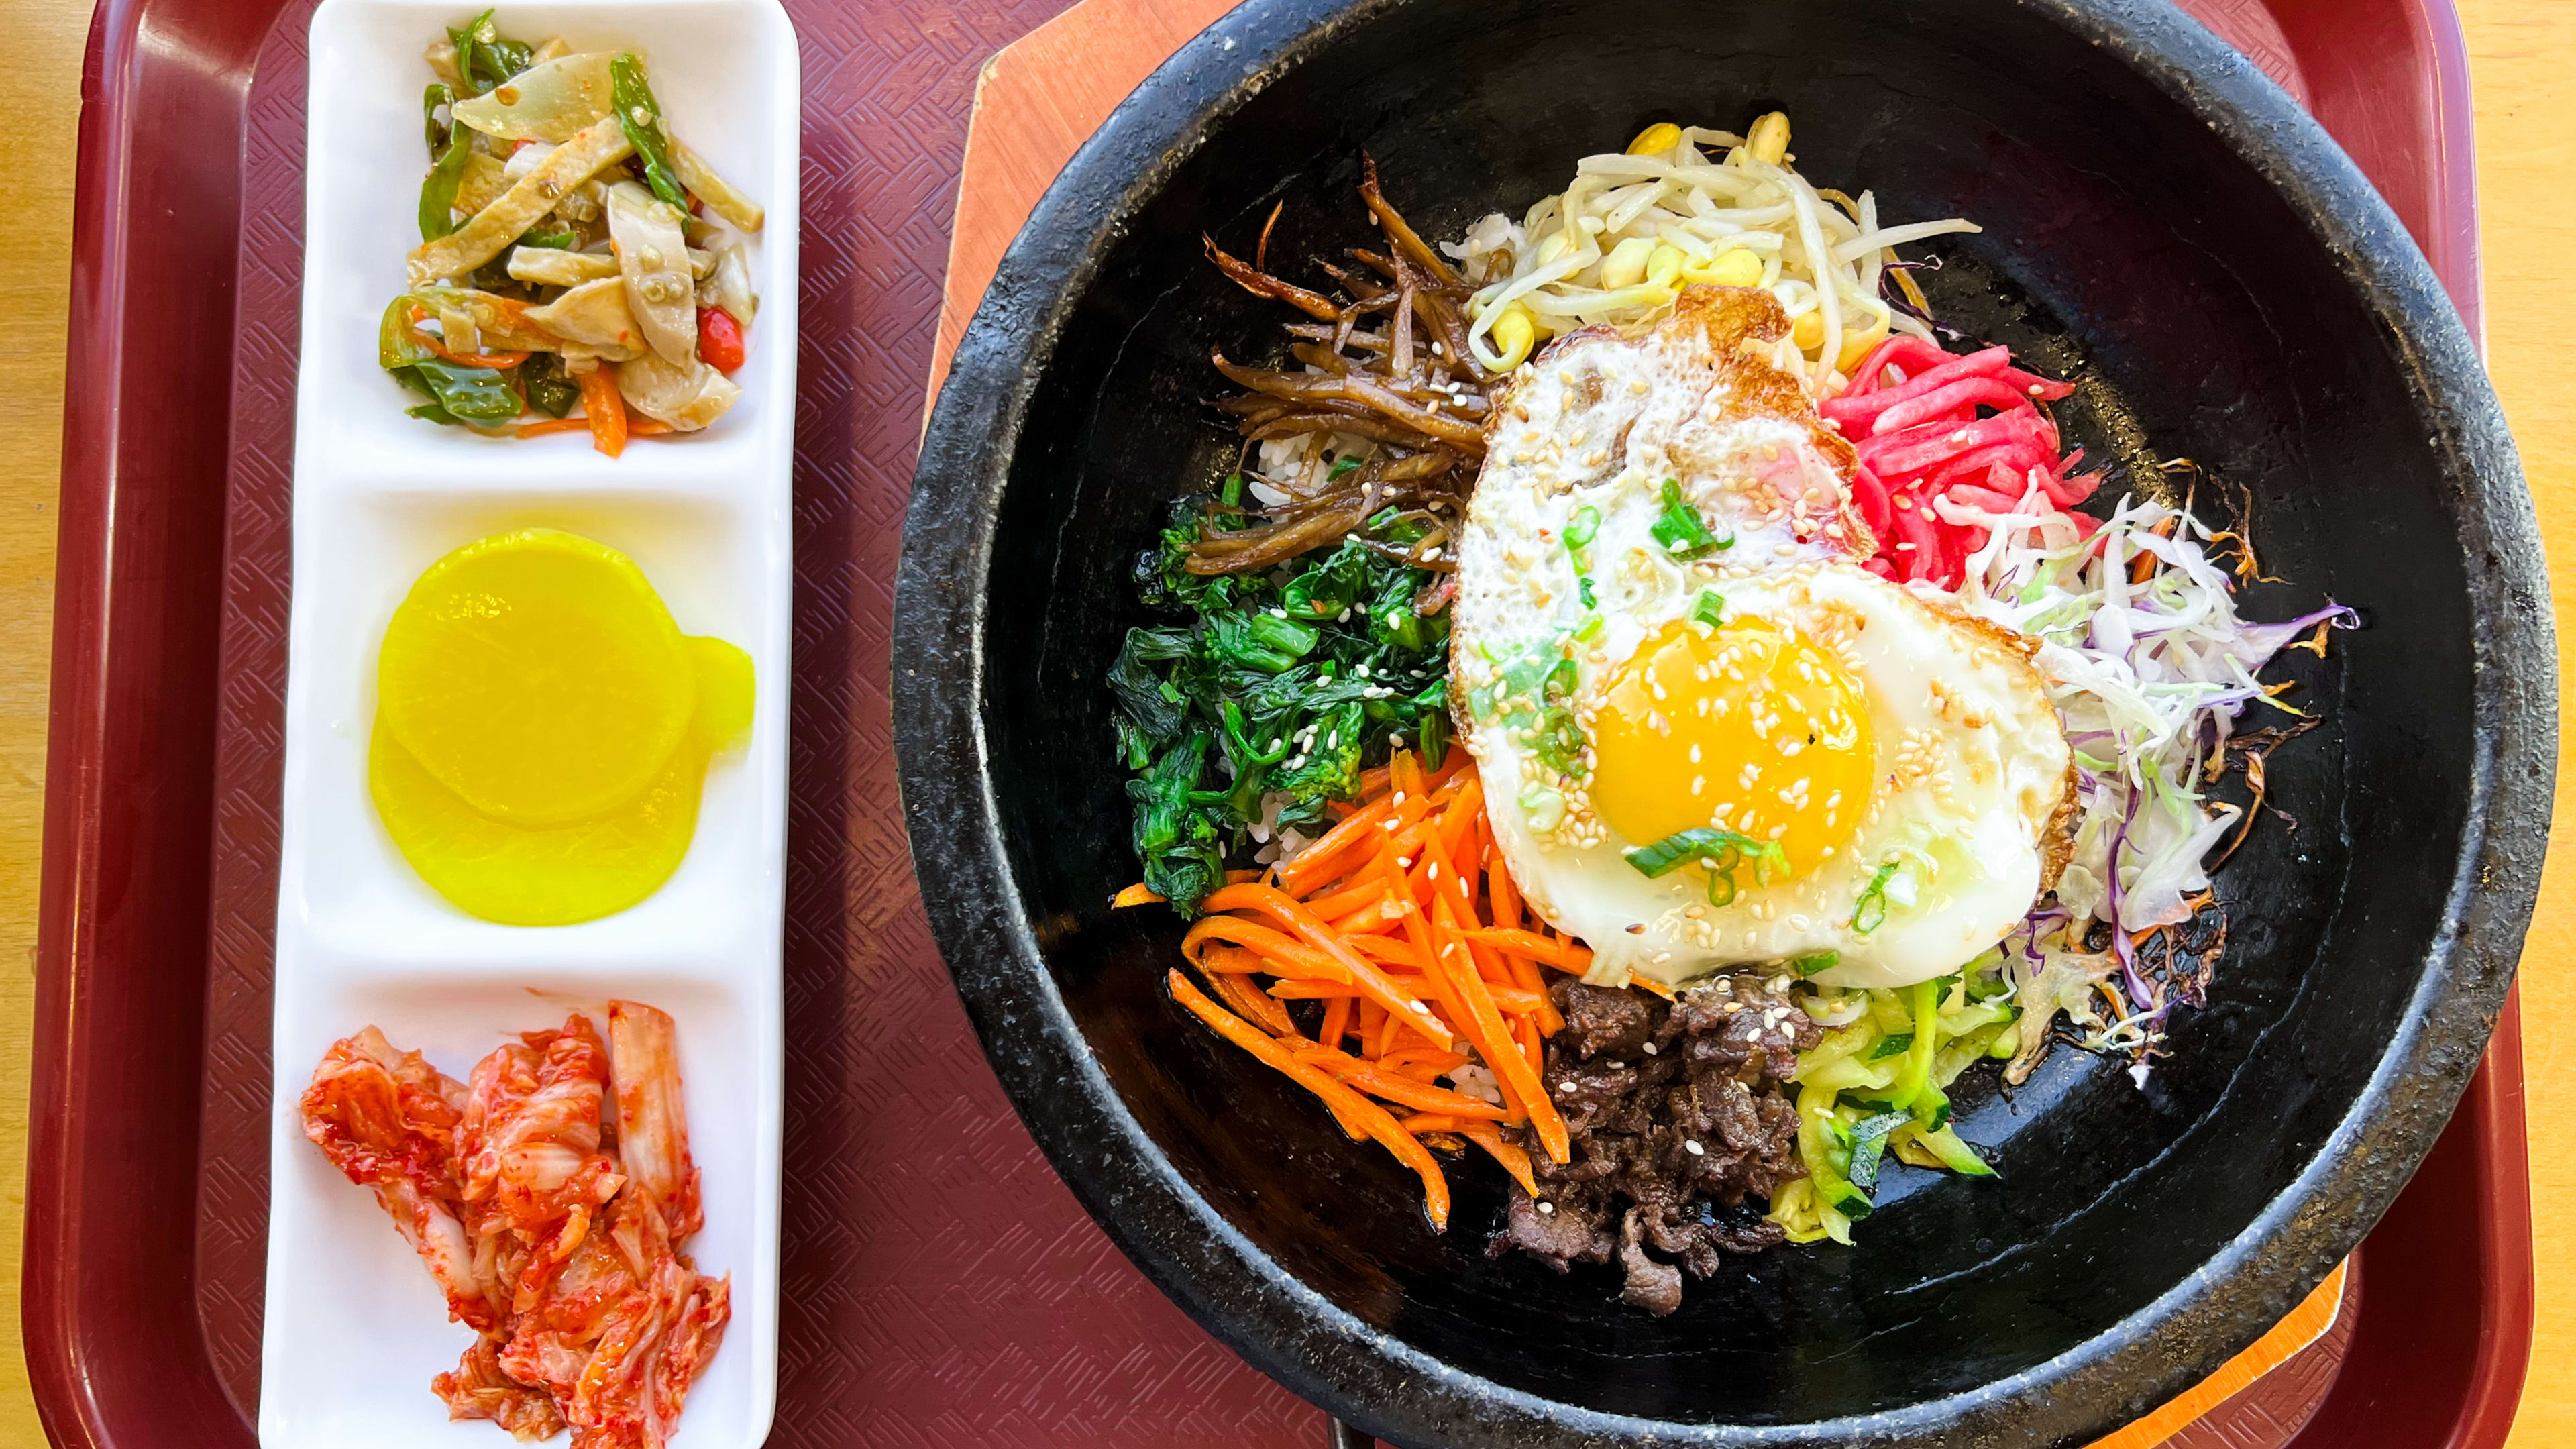 A bowl of bibimbap and accompanying sides on a red lunch tray.